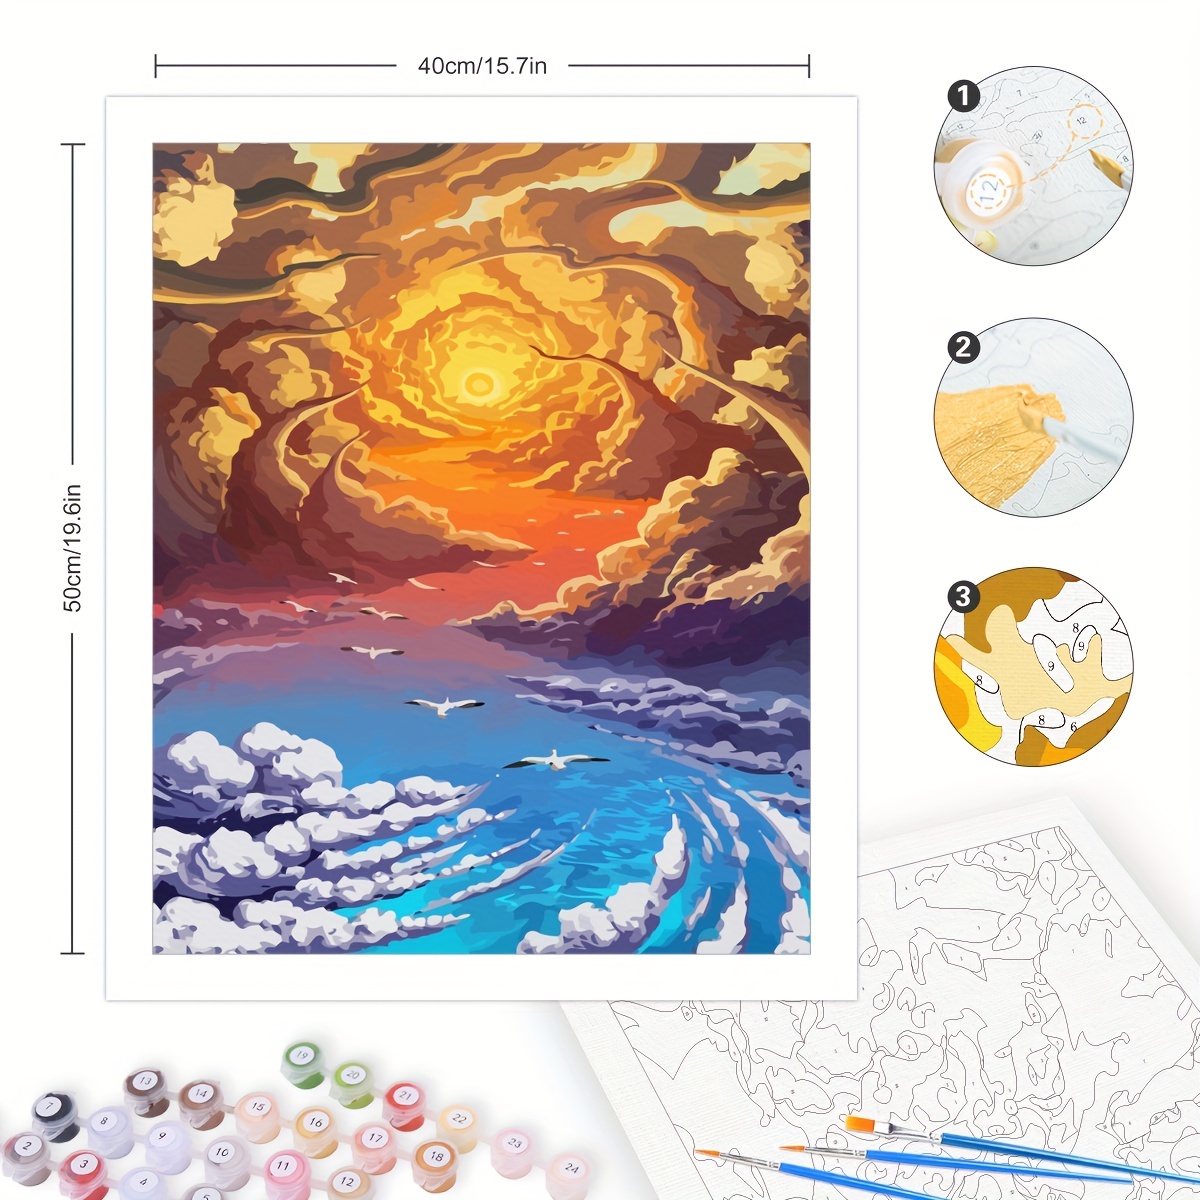 Hokusai Painting by Numbers DIY Kit Paint by Number Great Wave Art